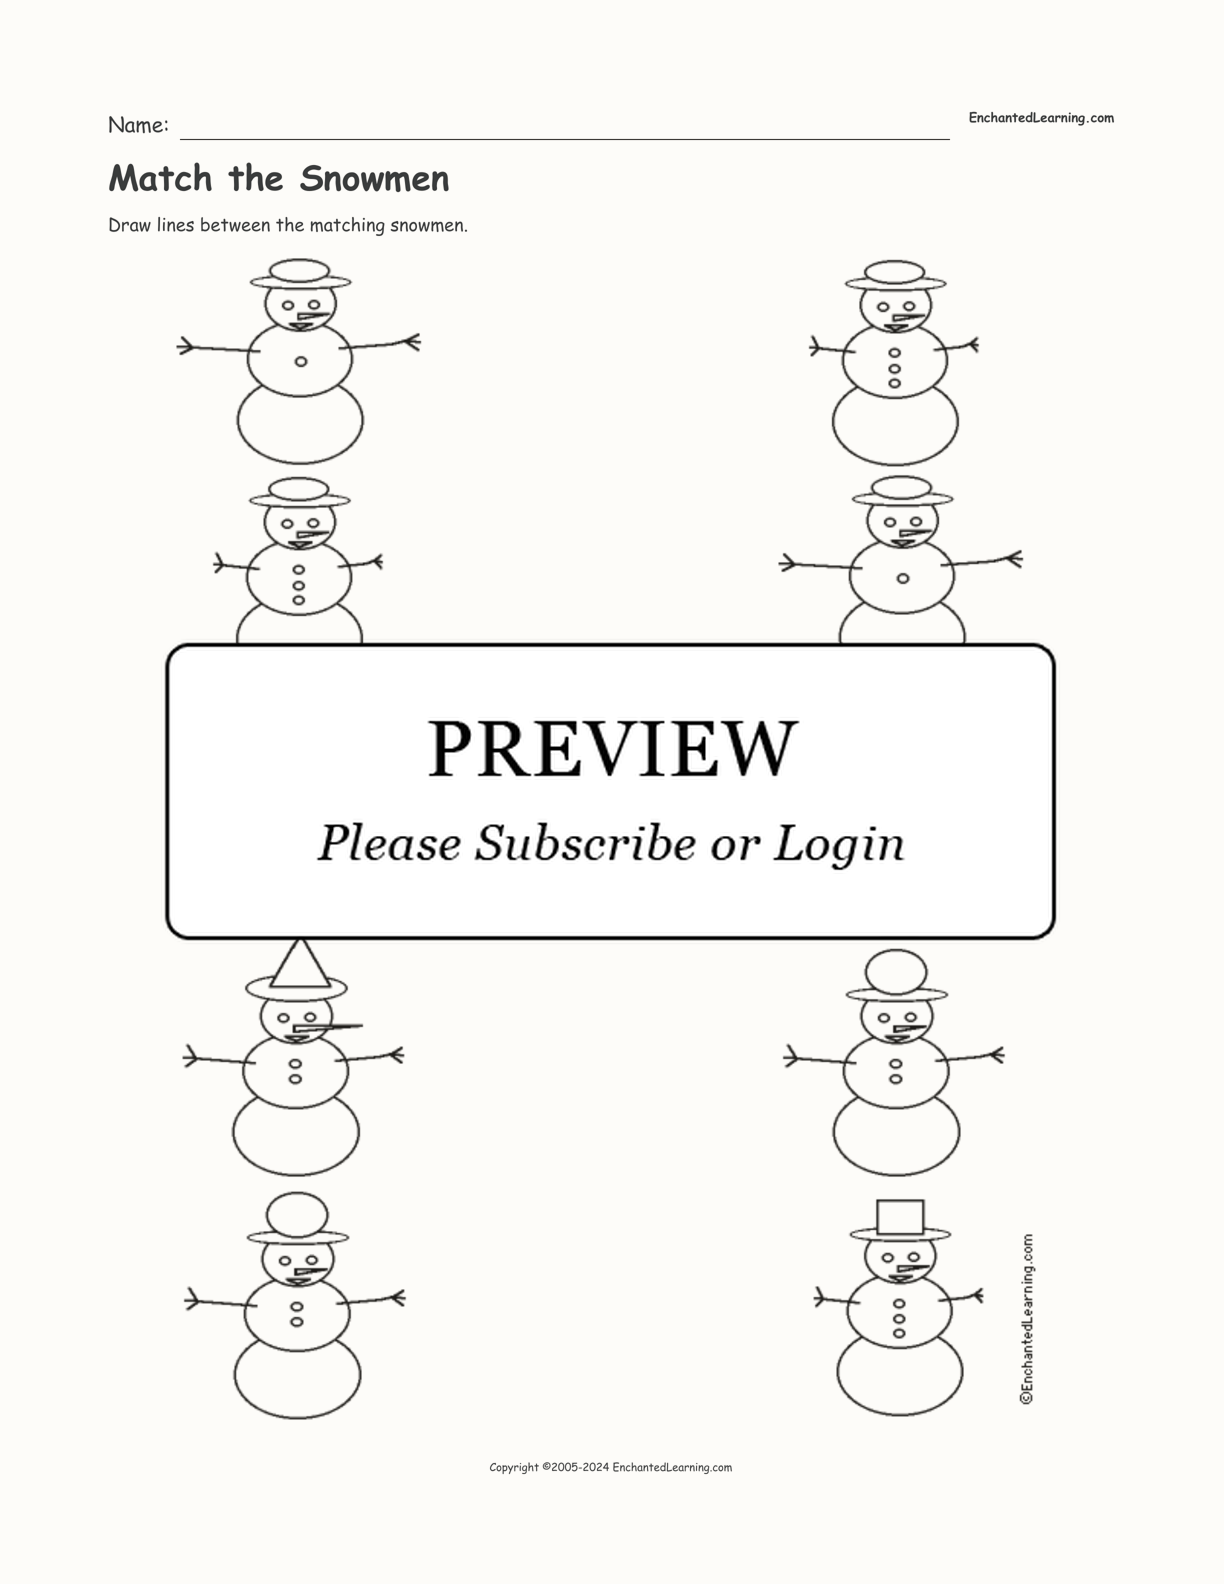 Match the Snowmen interactive worksheet page 1